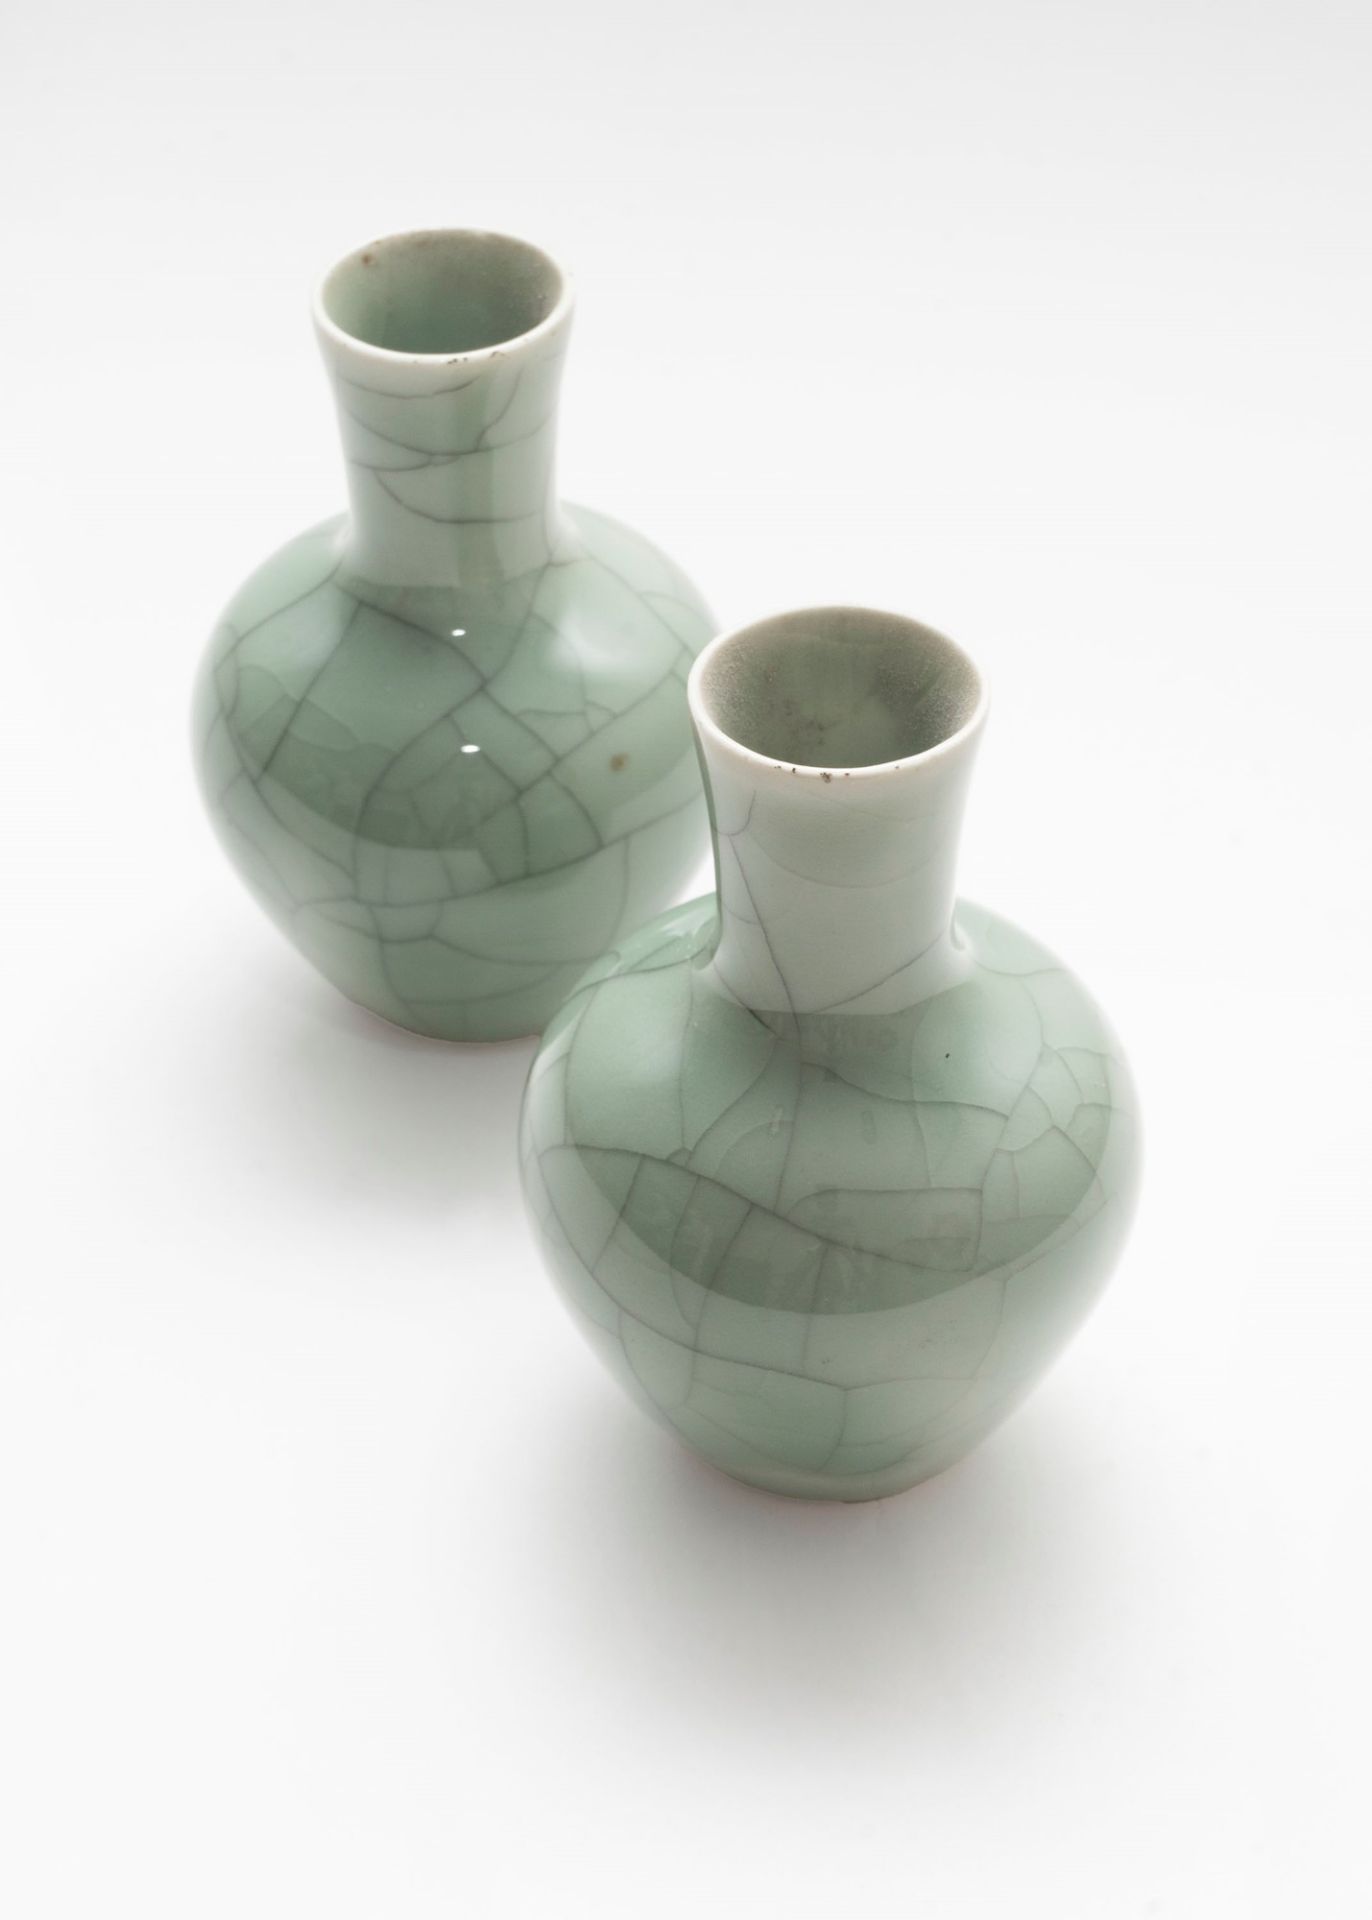 Pair of green Celadon porcelain vases, China, 20th century